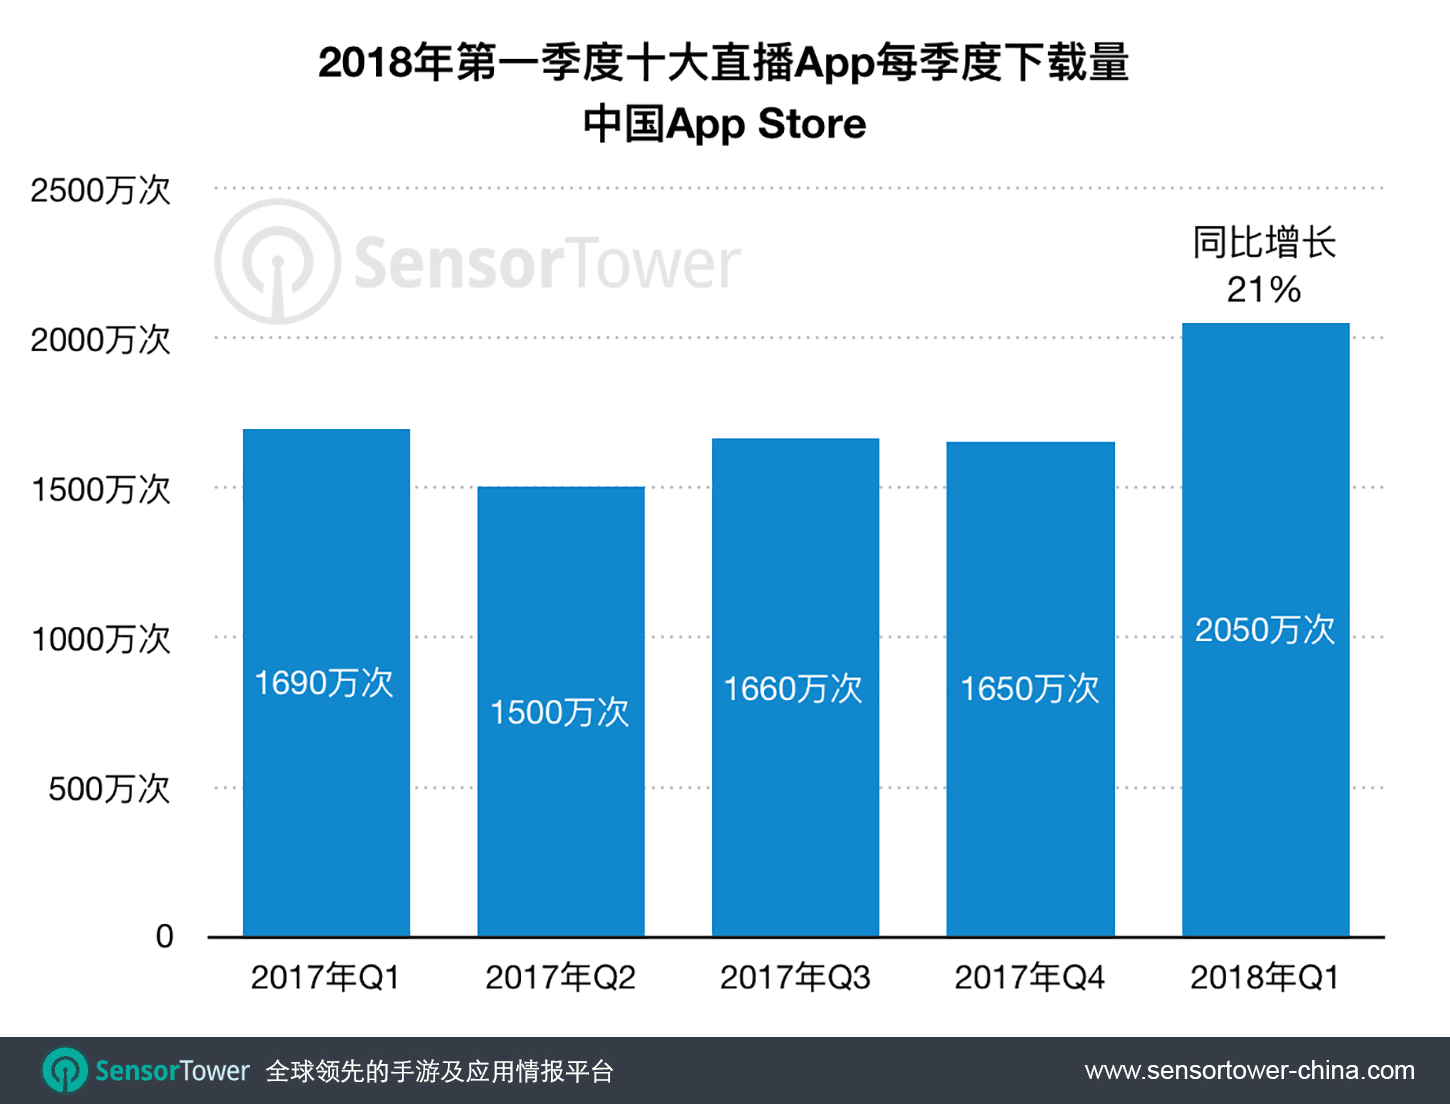 China's Top 10 Live Streaming Apps 1Q17 to 1Q18 QoQ Download Trend